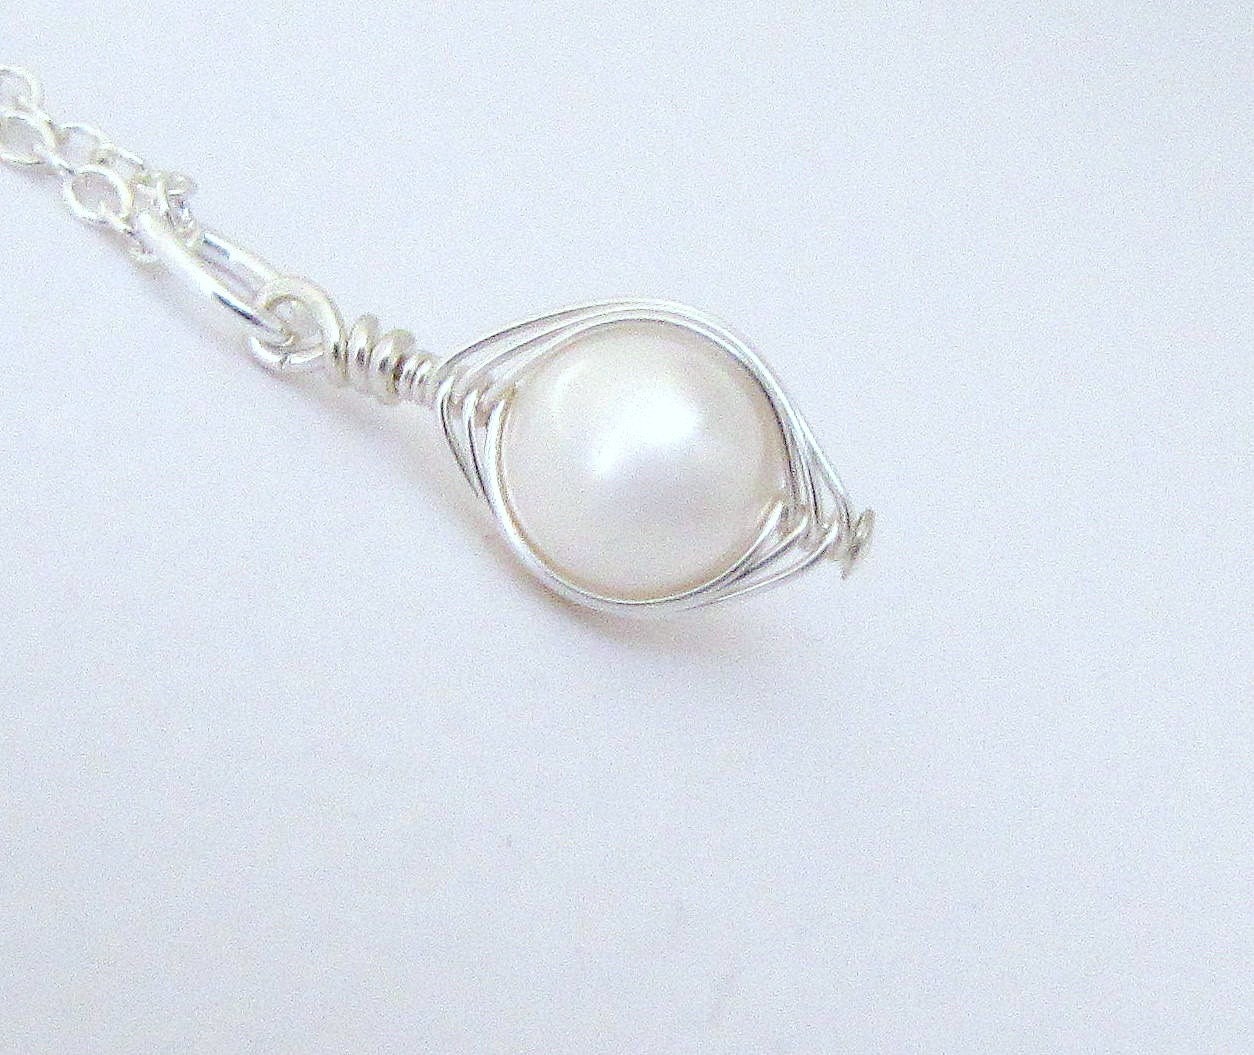 White Pearl Wire Wrapped Bridal Necklace by SilverSmack on Etsy necklace 